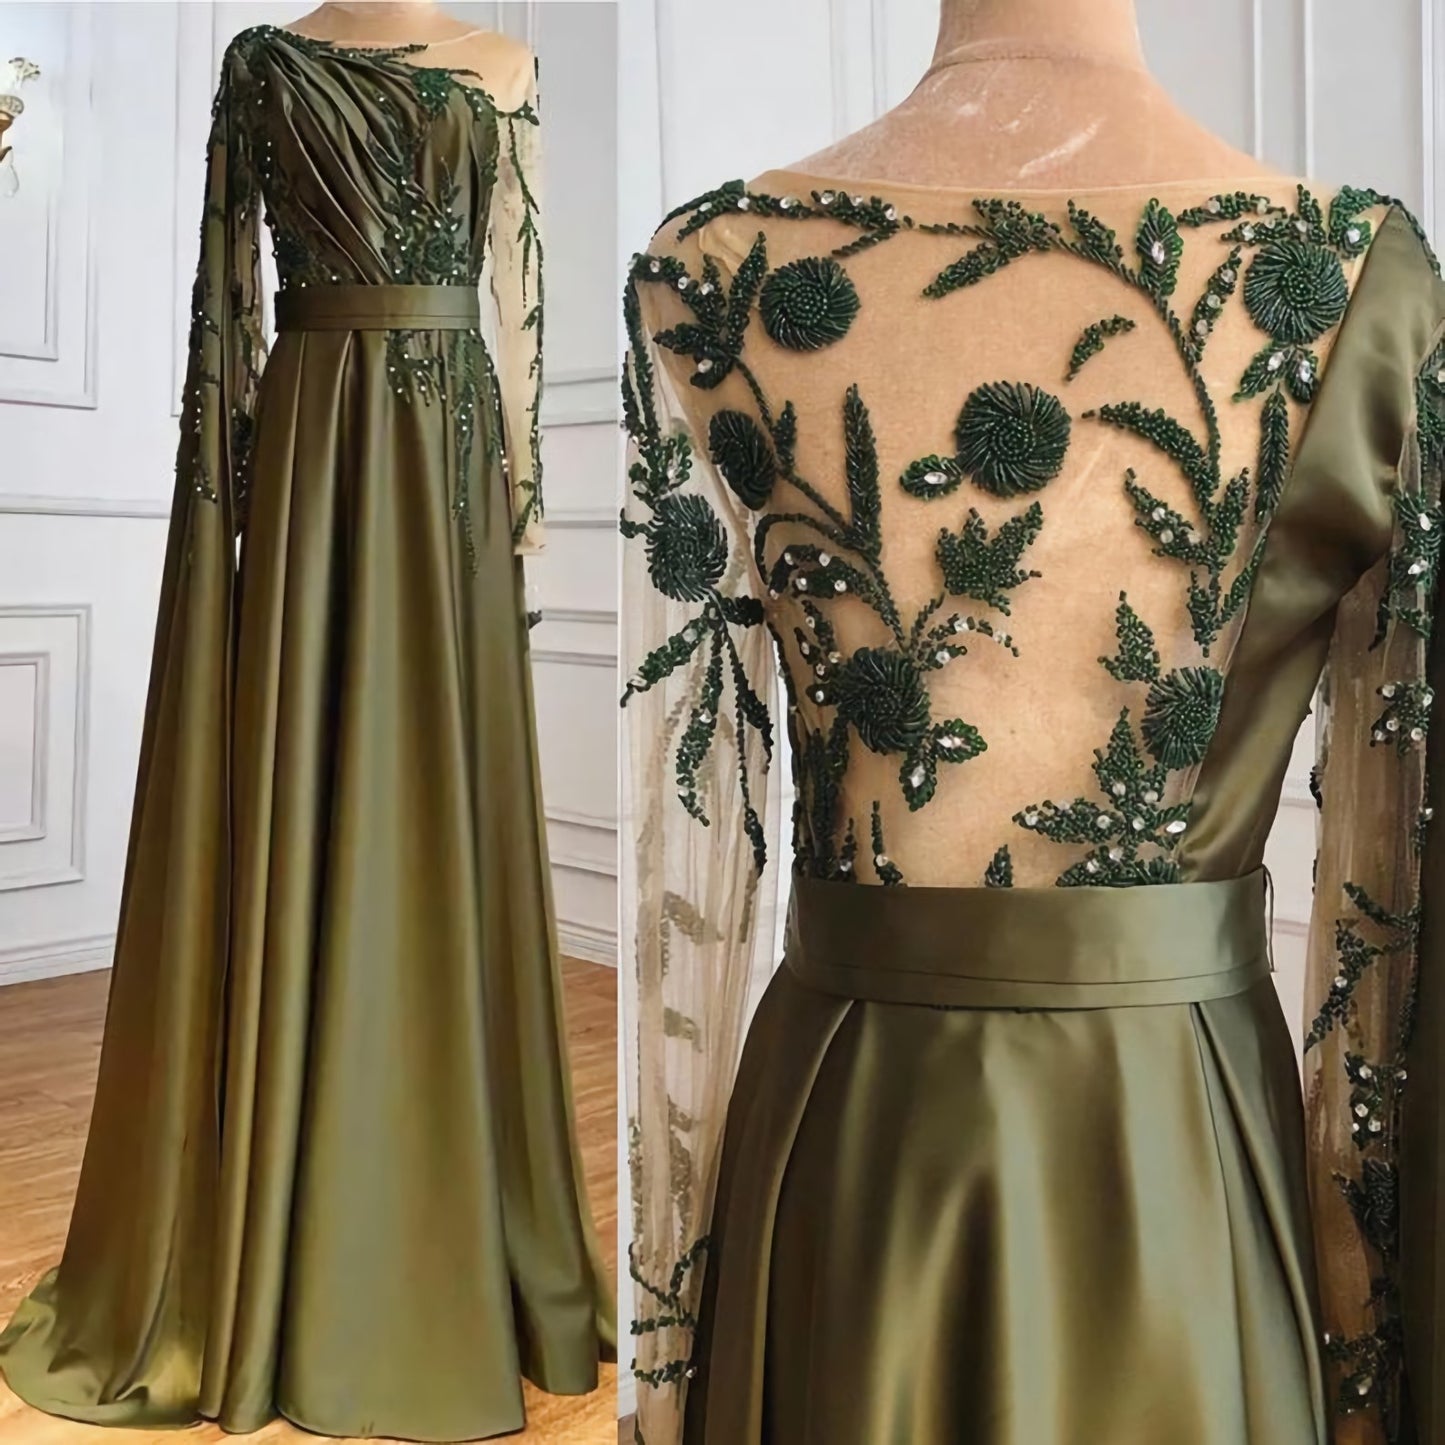 Luxury Olive Green Evening Moroccan Dress, Beading Sequined Formal Party Wear Gown Dubai Evening Dress